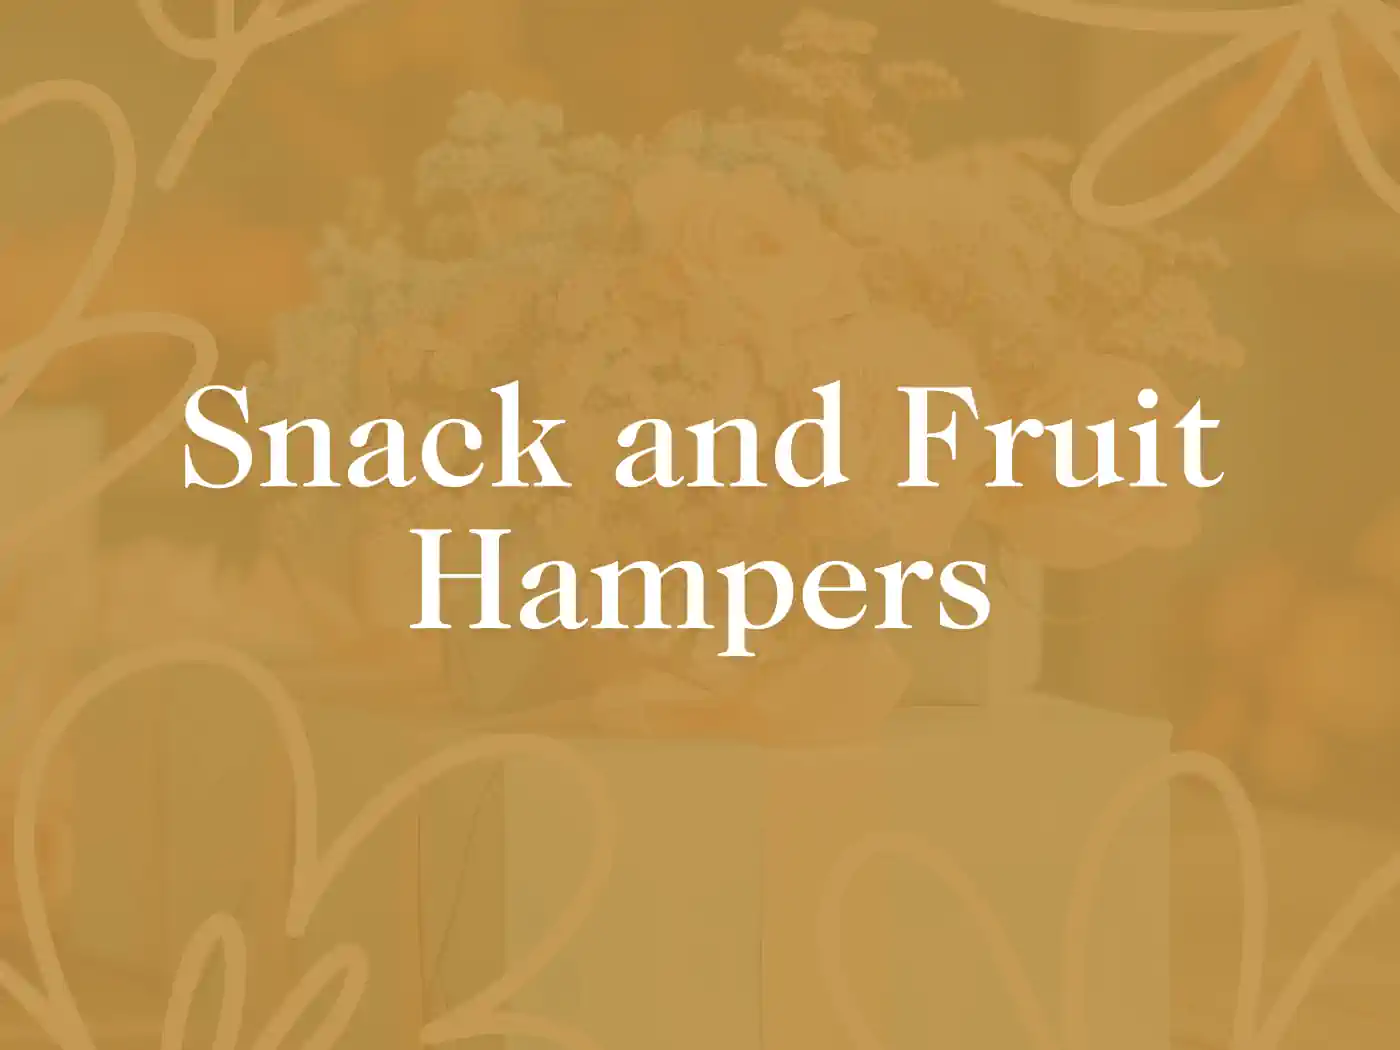 A beautifully designed floral arrangement with the text "Snack and Fruit Hampers" displayed prominently. Fabulous Flowers and Gifts, Snack and Fruit Hampers Collection.